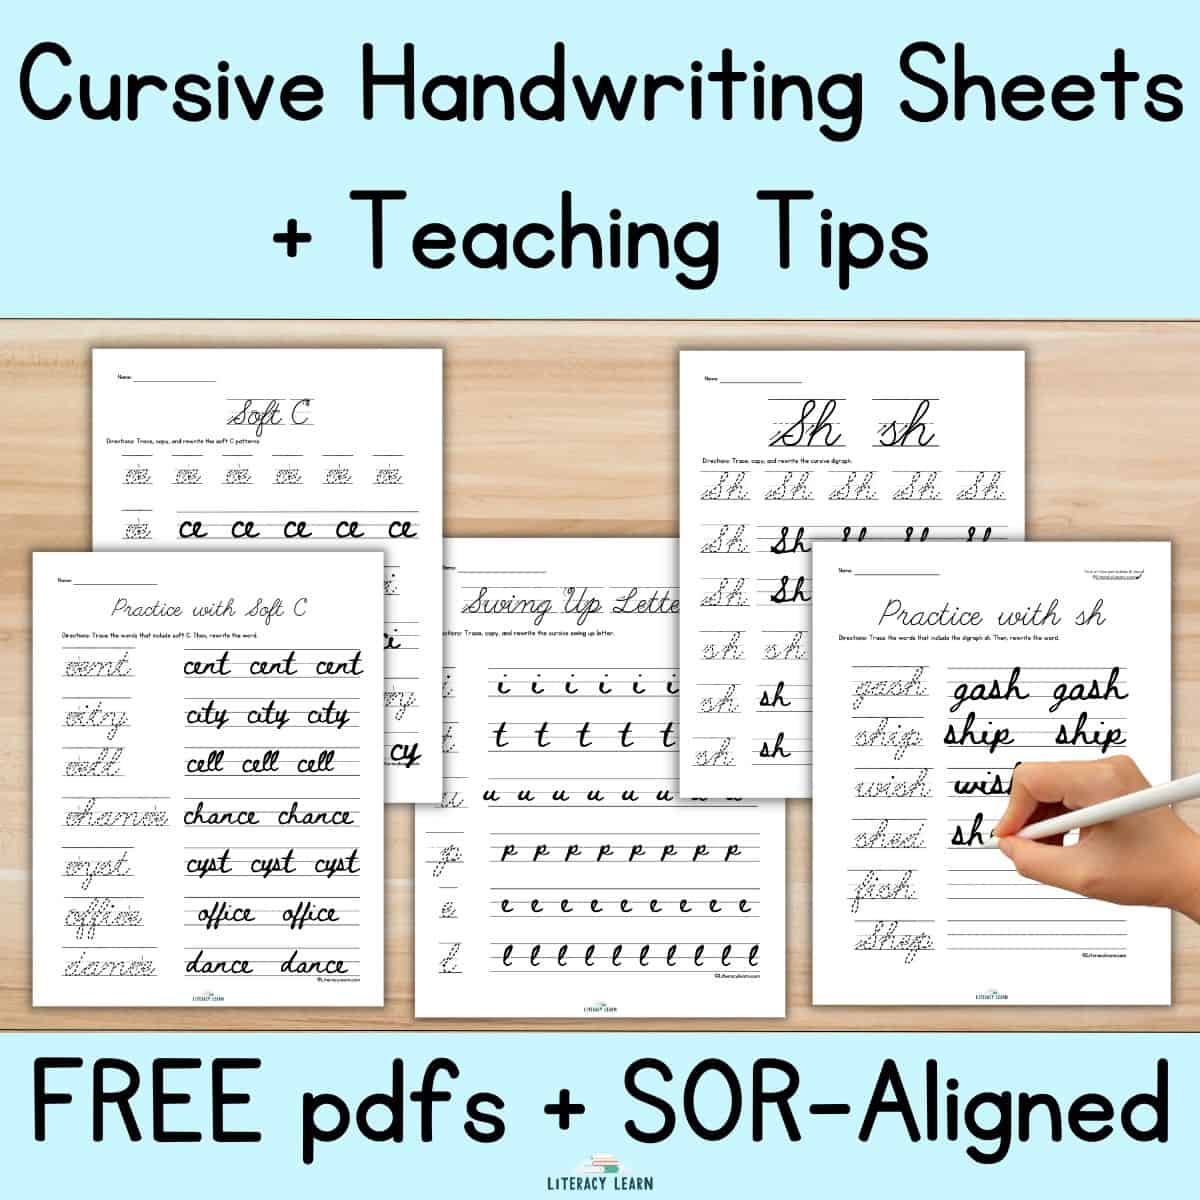 Cursive Handwriting Practice Sheets: Free pdfs (SOR-Aligned